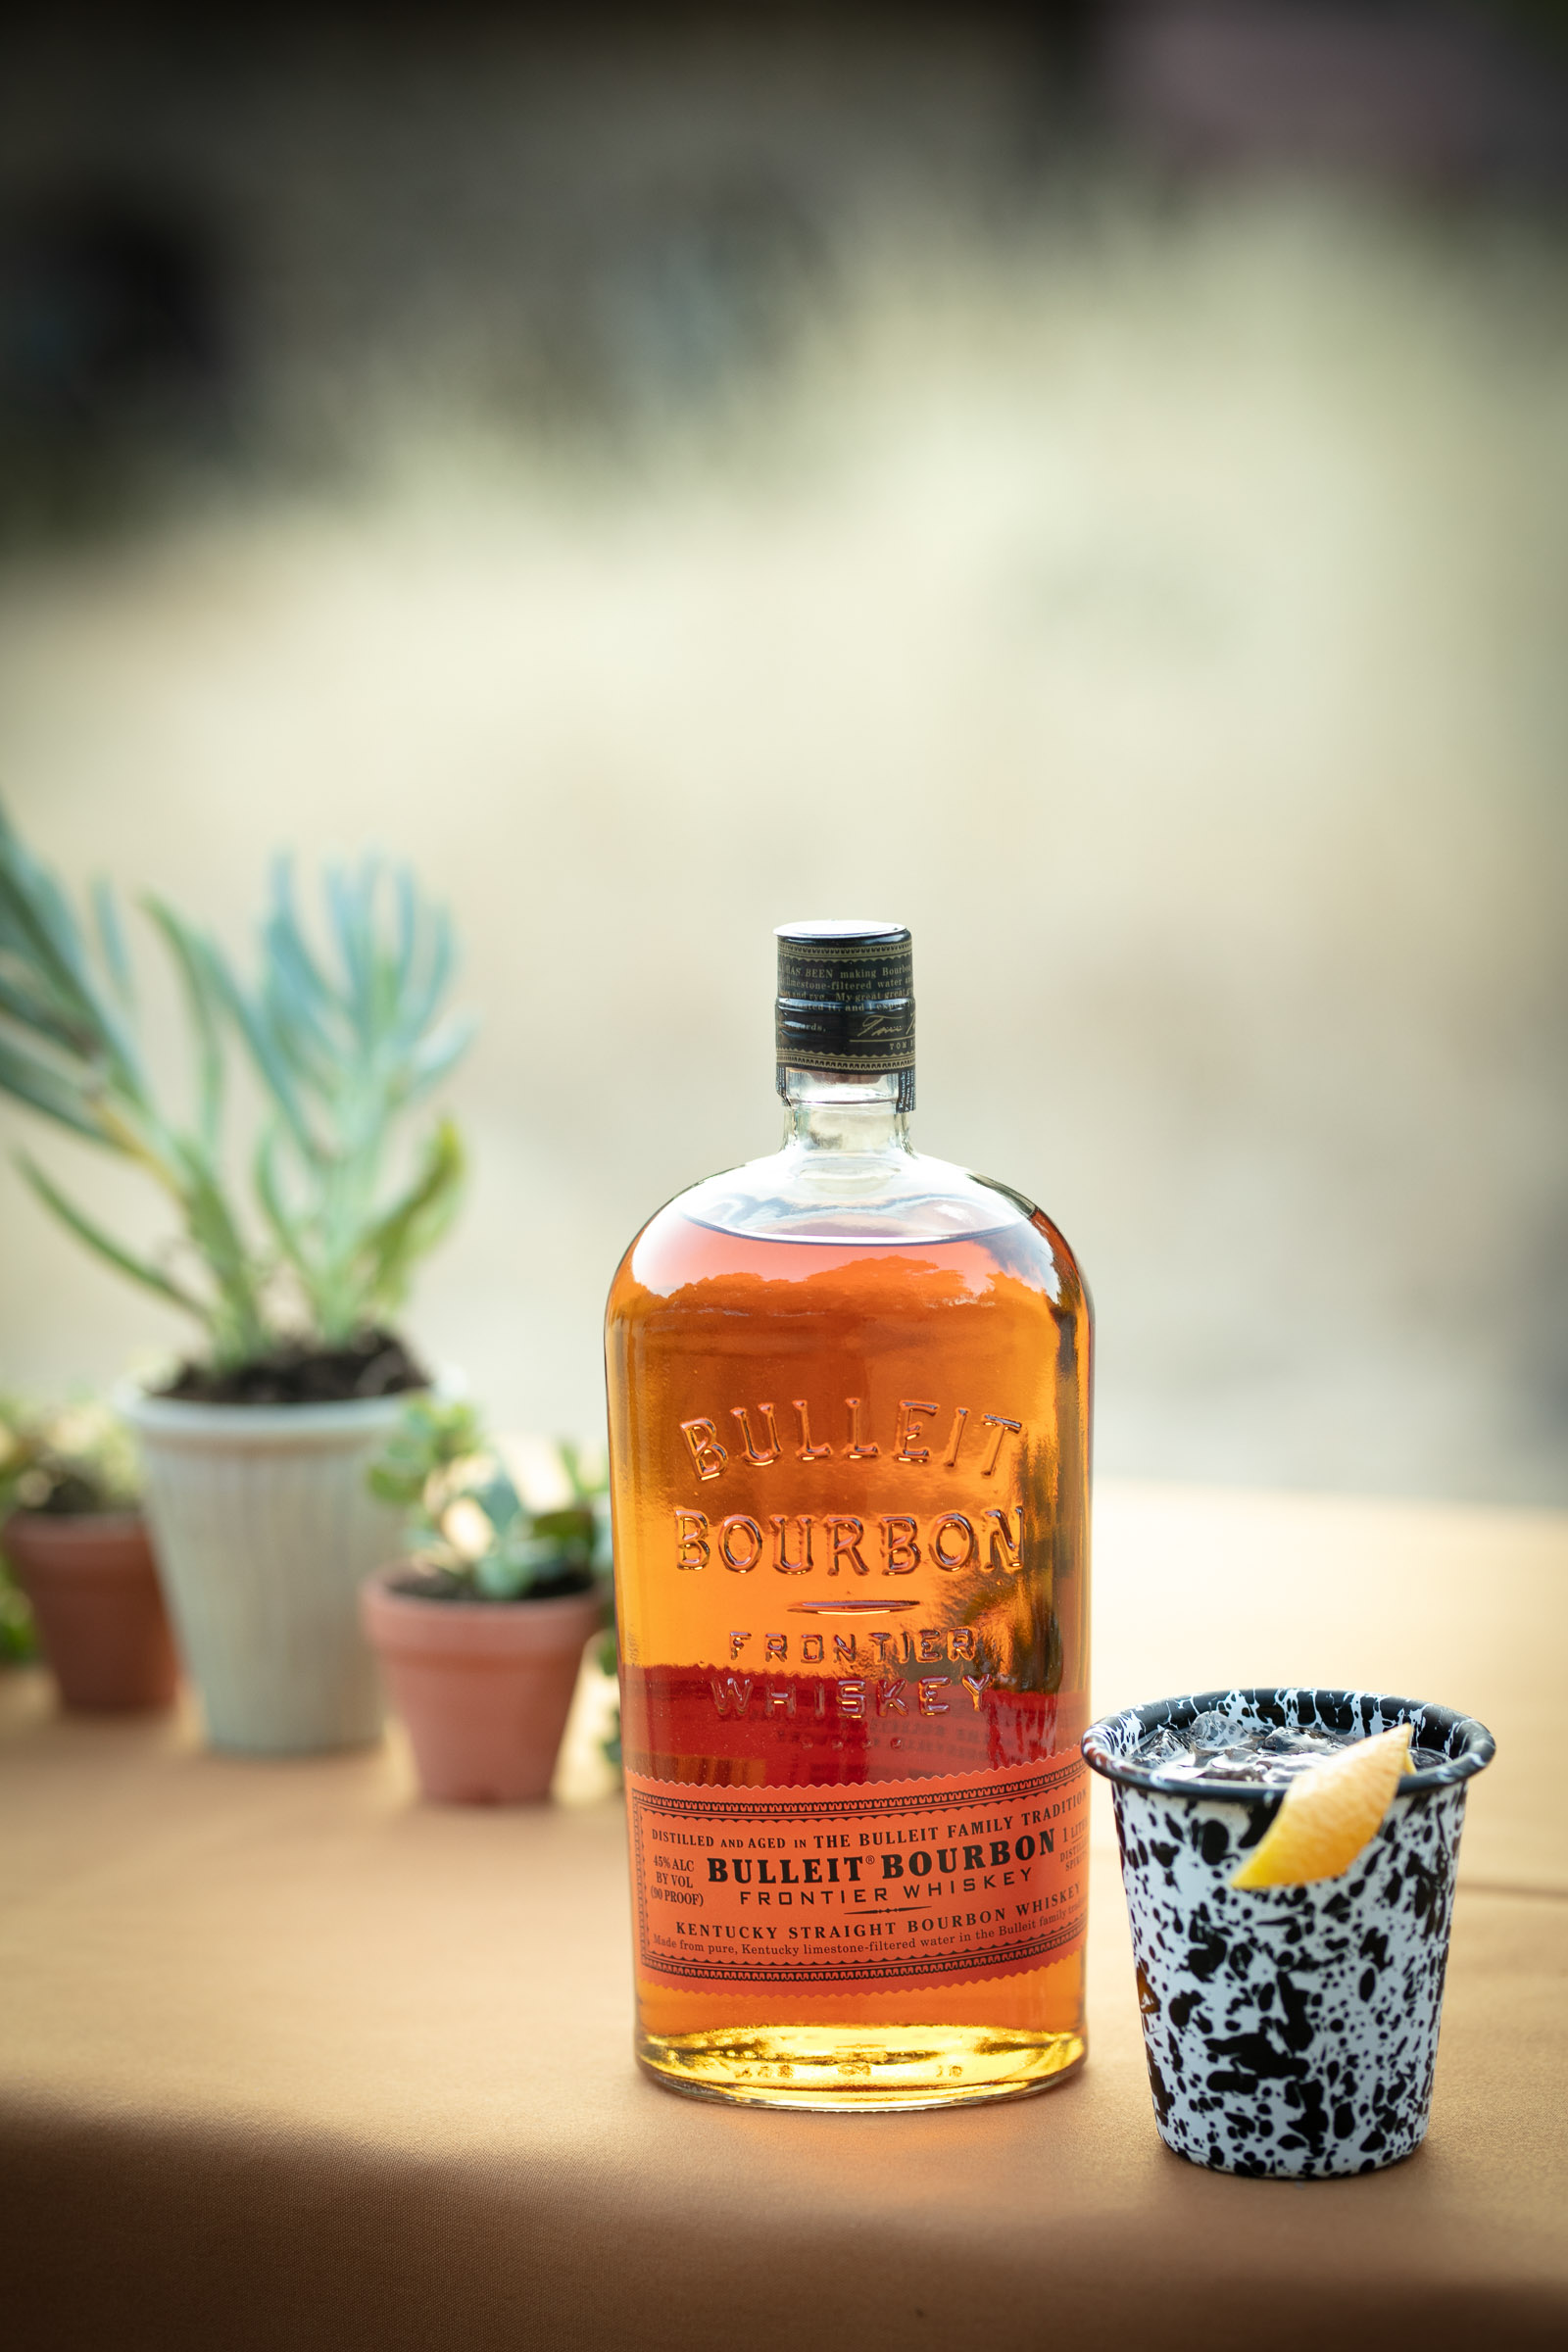 The Bulleit Frontier Dinner with Niman Ranch & Friends | The Outpost